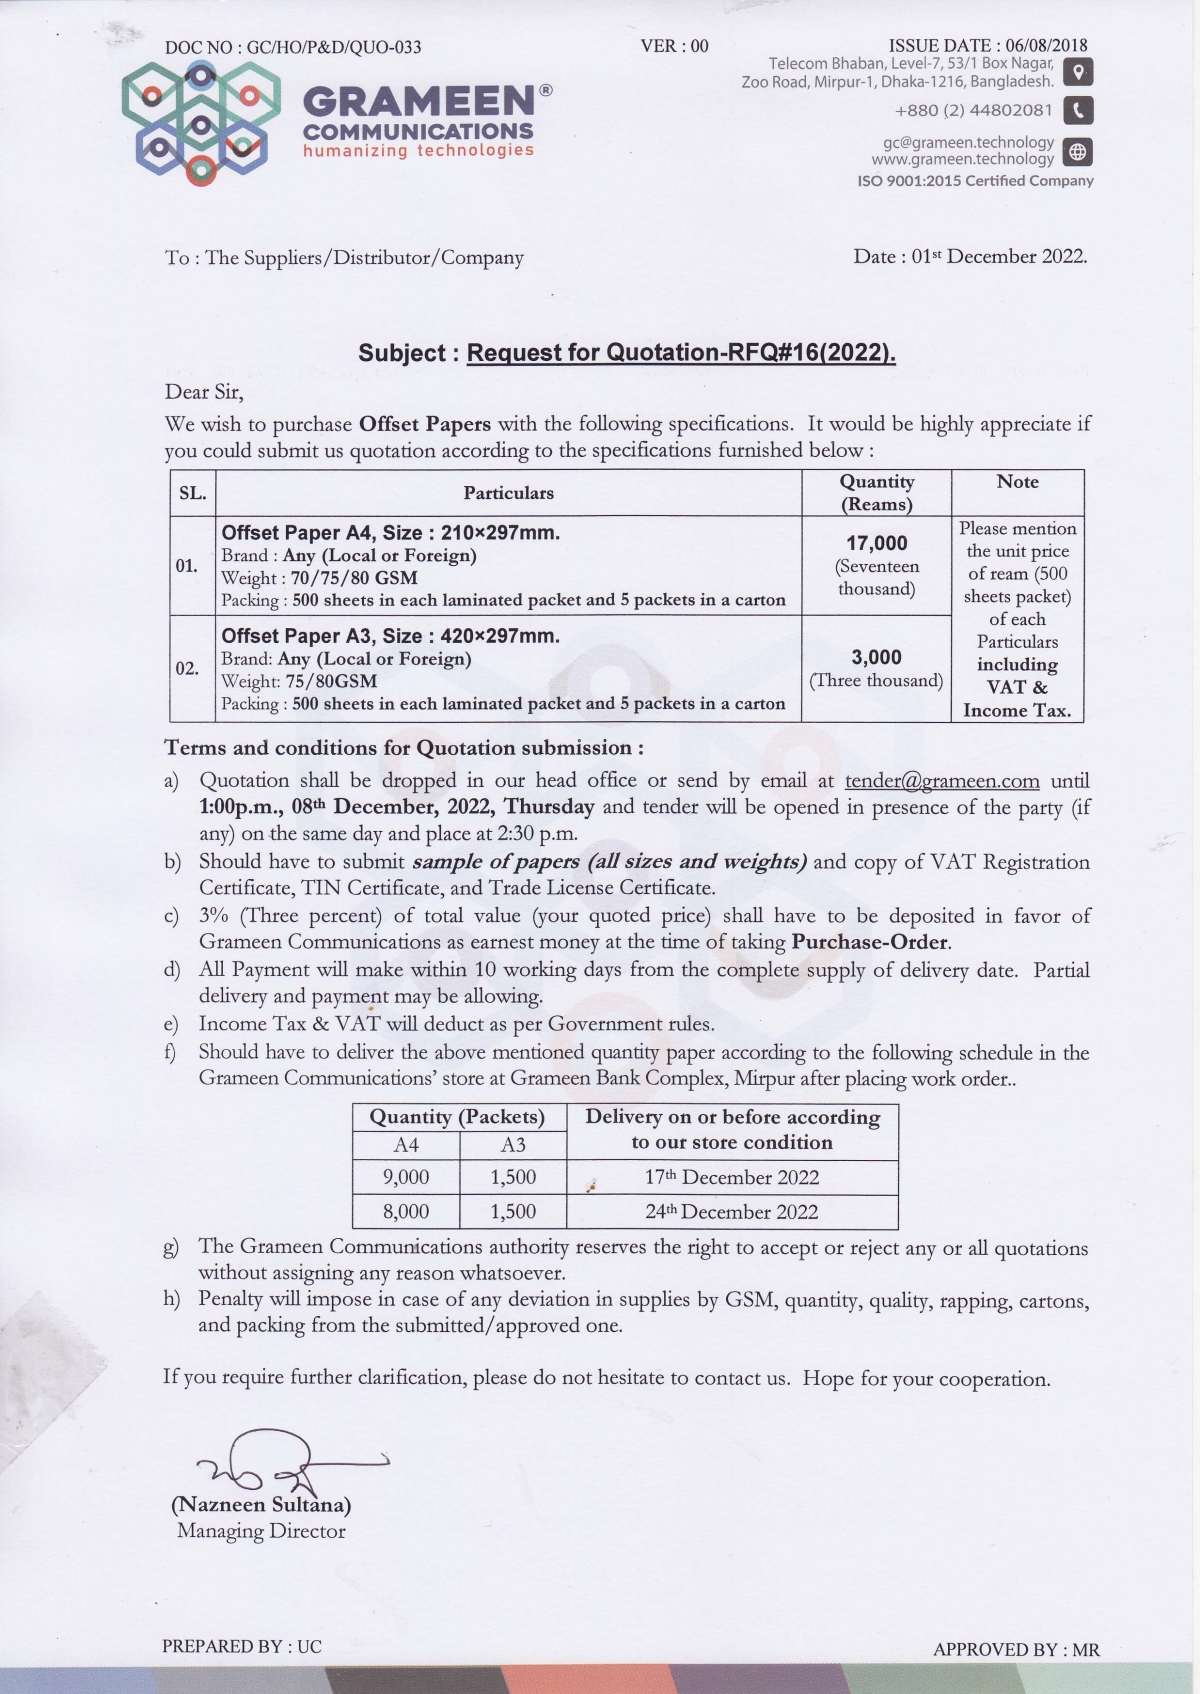 Request for Quotation-16-2022